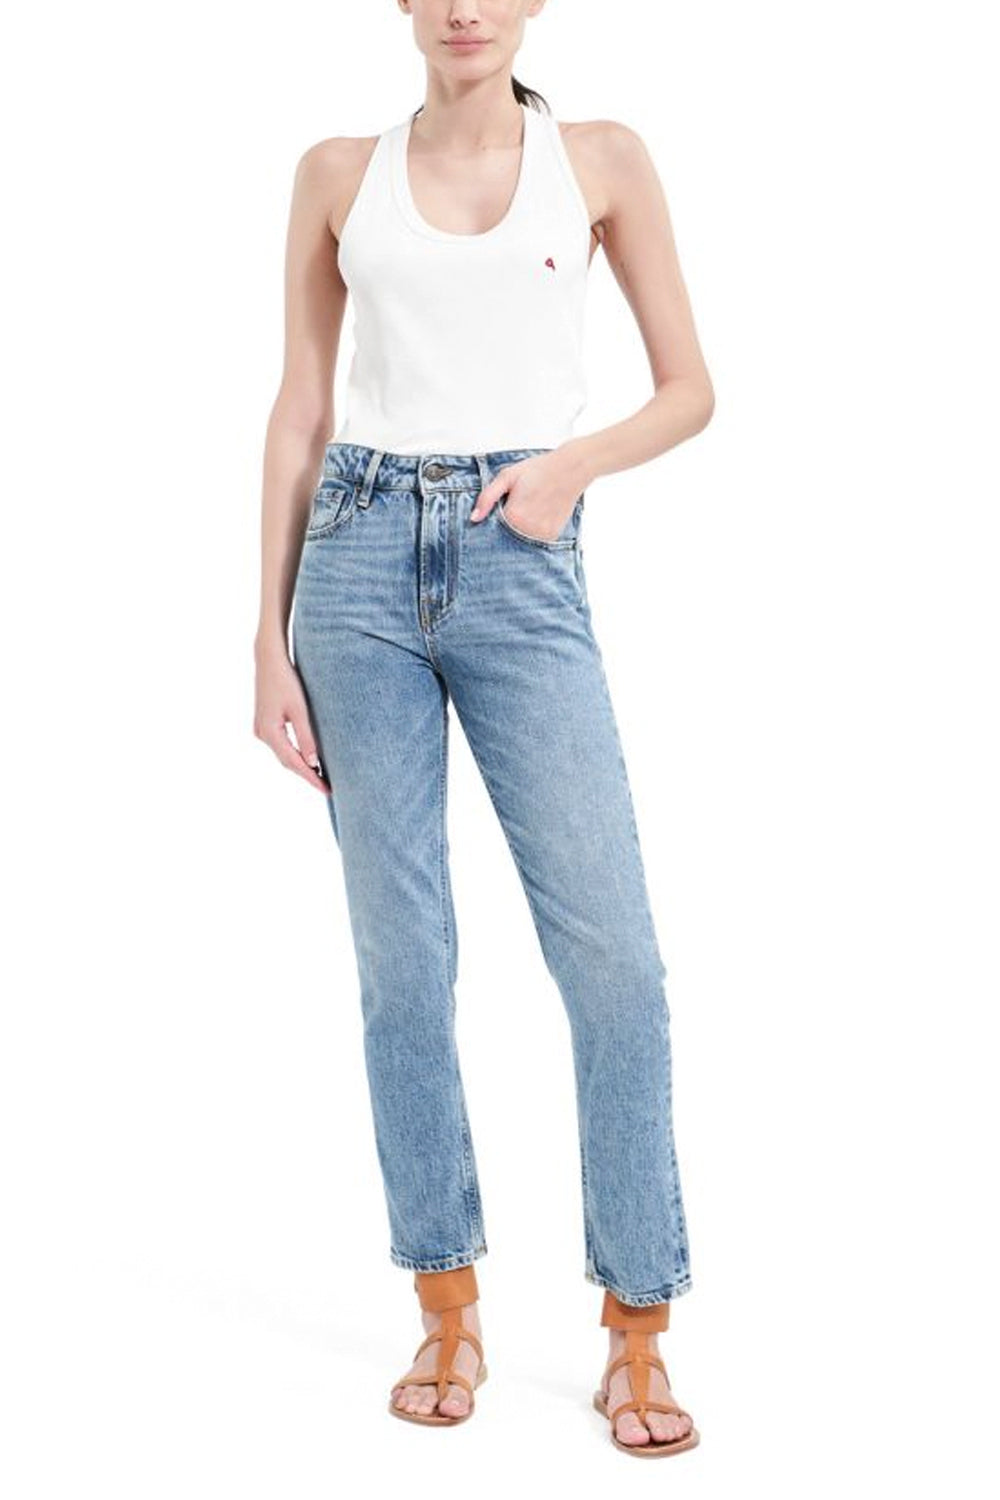 CYCLE Jeans Body rock slim high rise